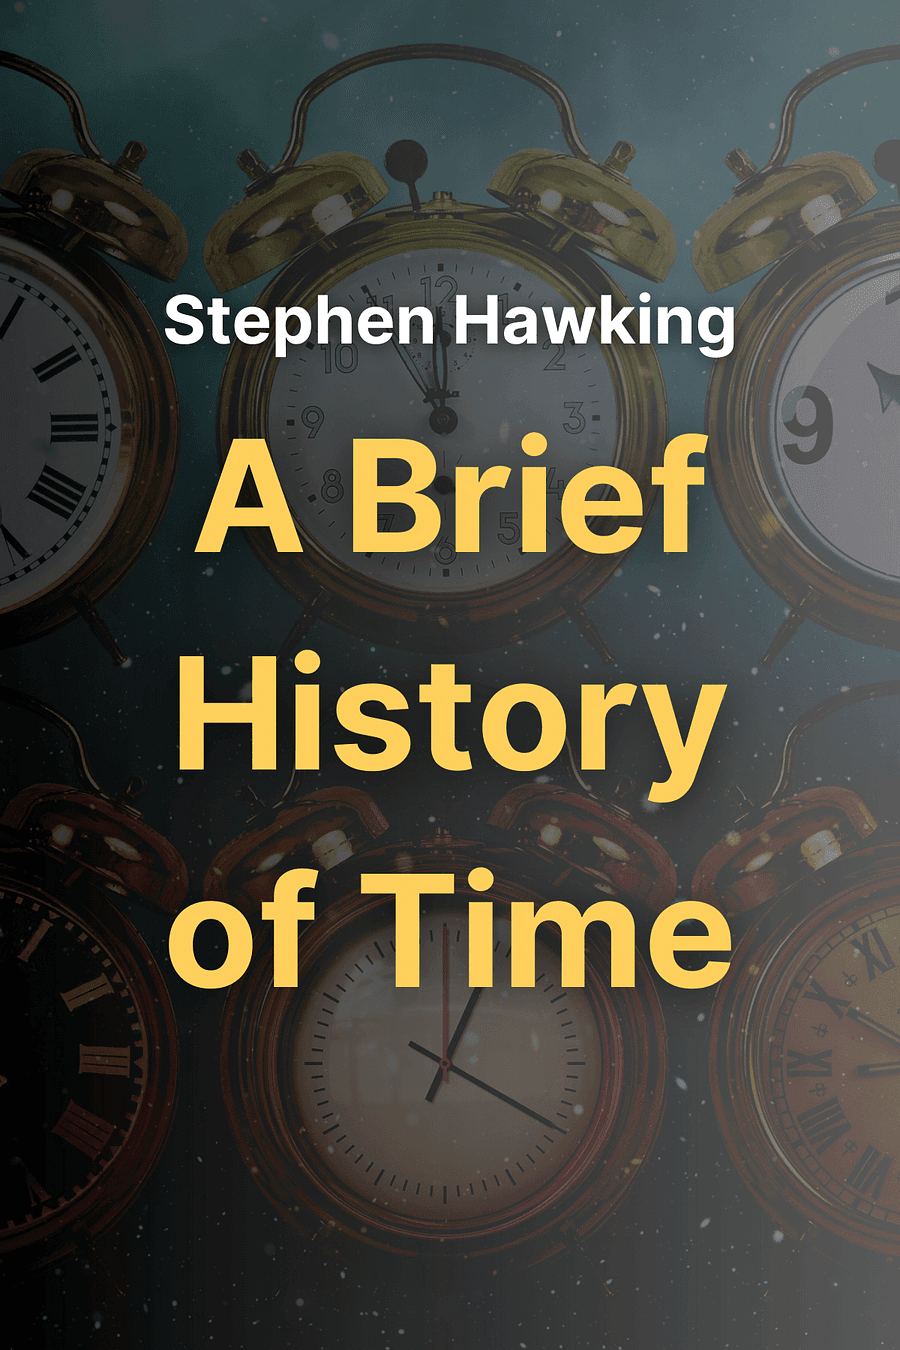 A Brief History of Time by Stephen Hawking - Book Summary